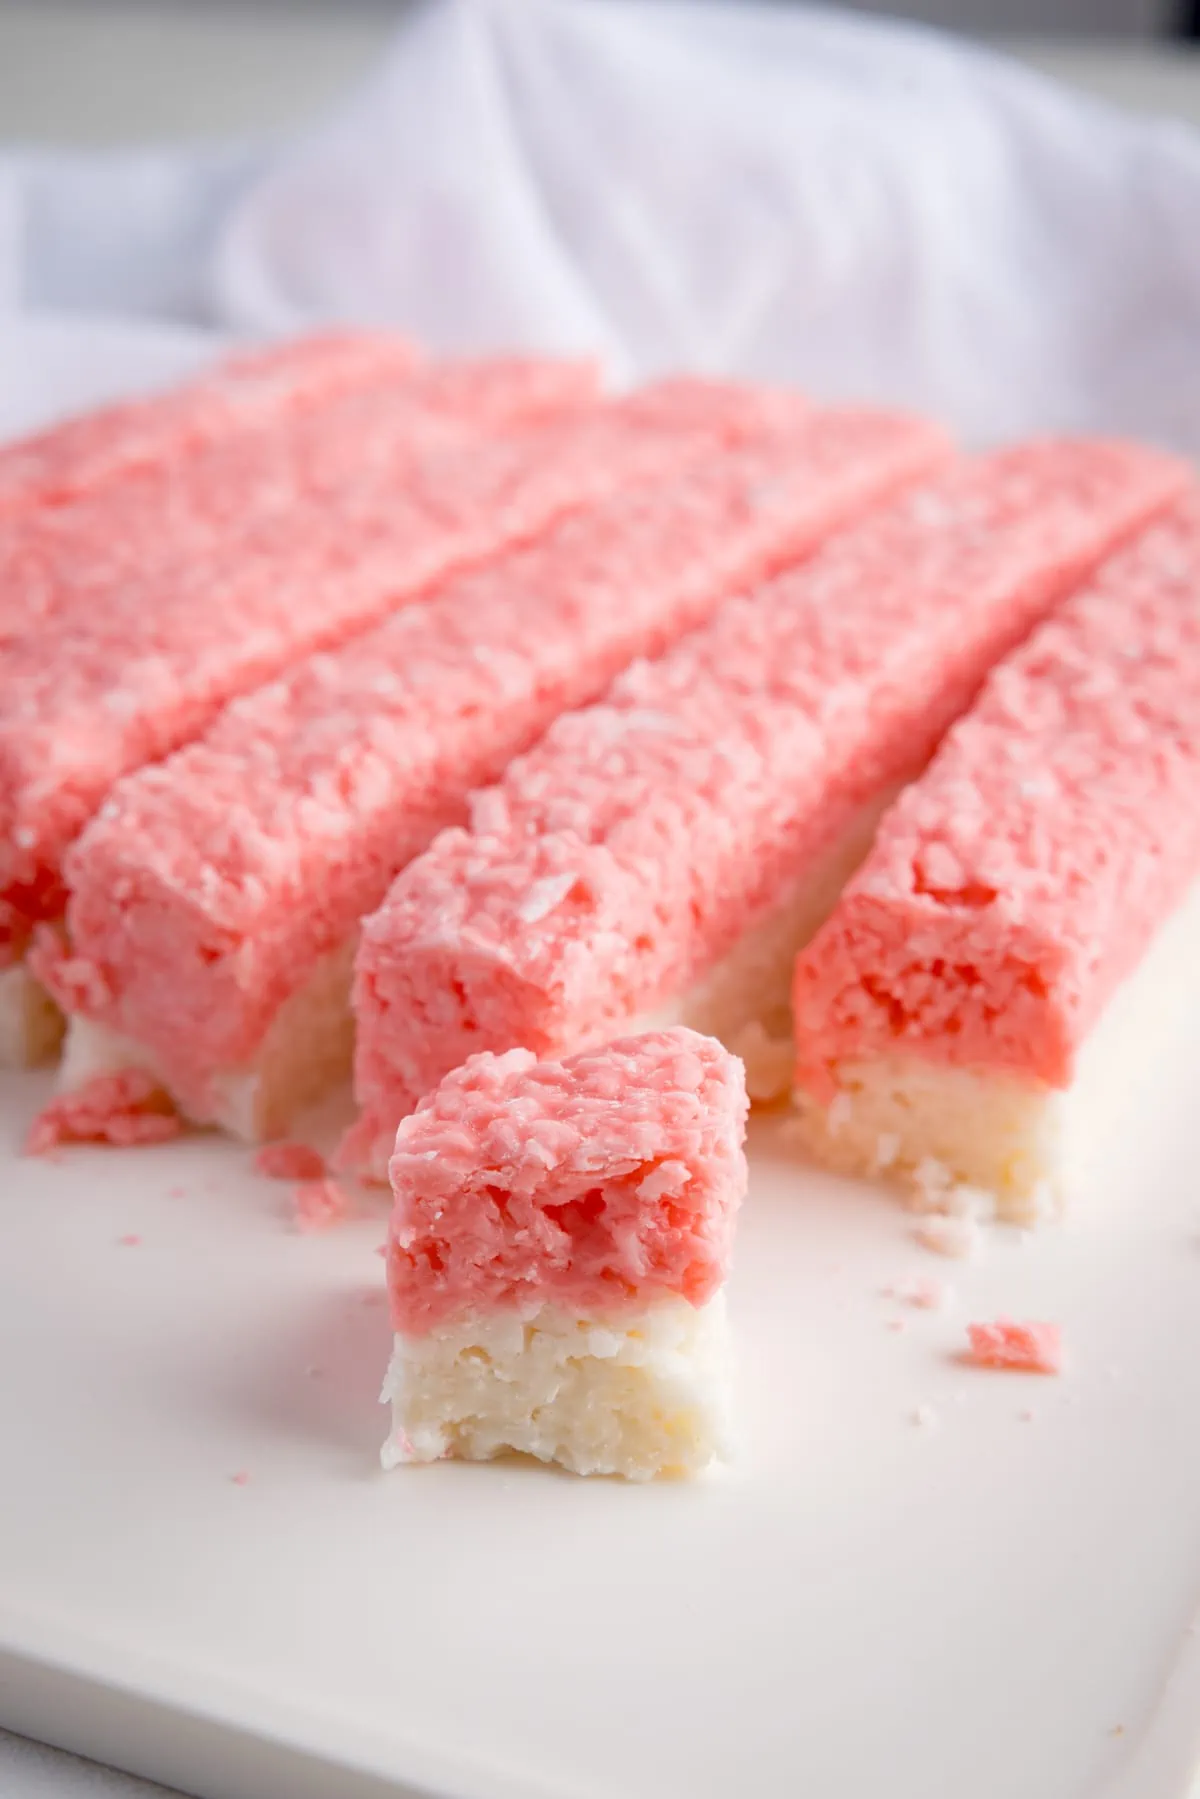 Pink and white coconut ice, sliced into long rows in a white board. There is one small cube of coconut ice in the foreground of the picture. There is a white napkin in the background.